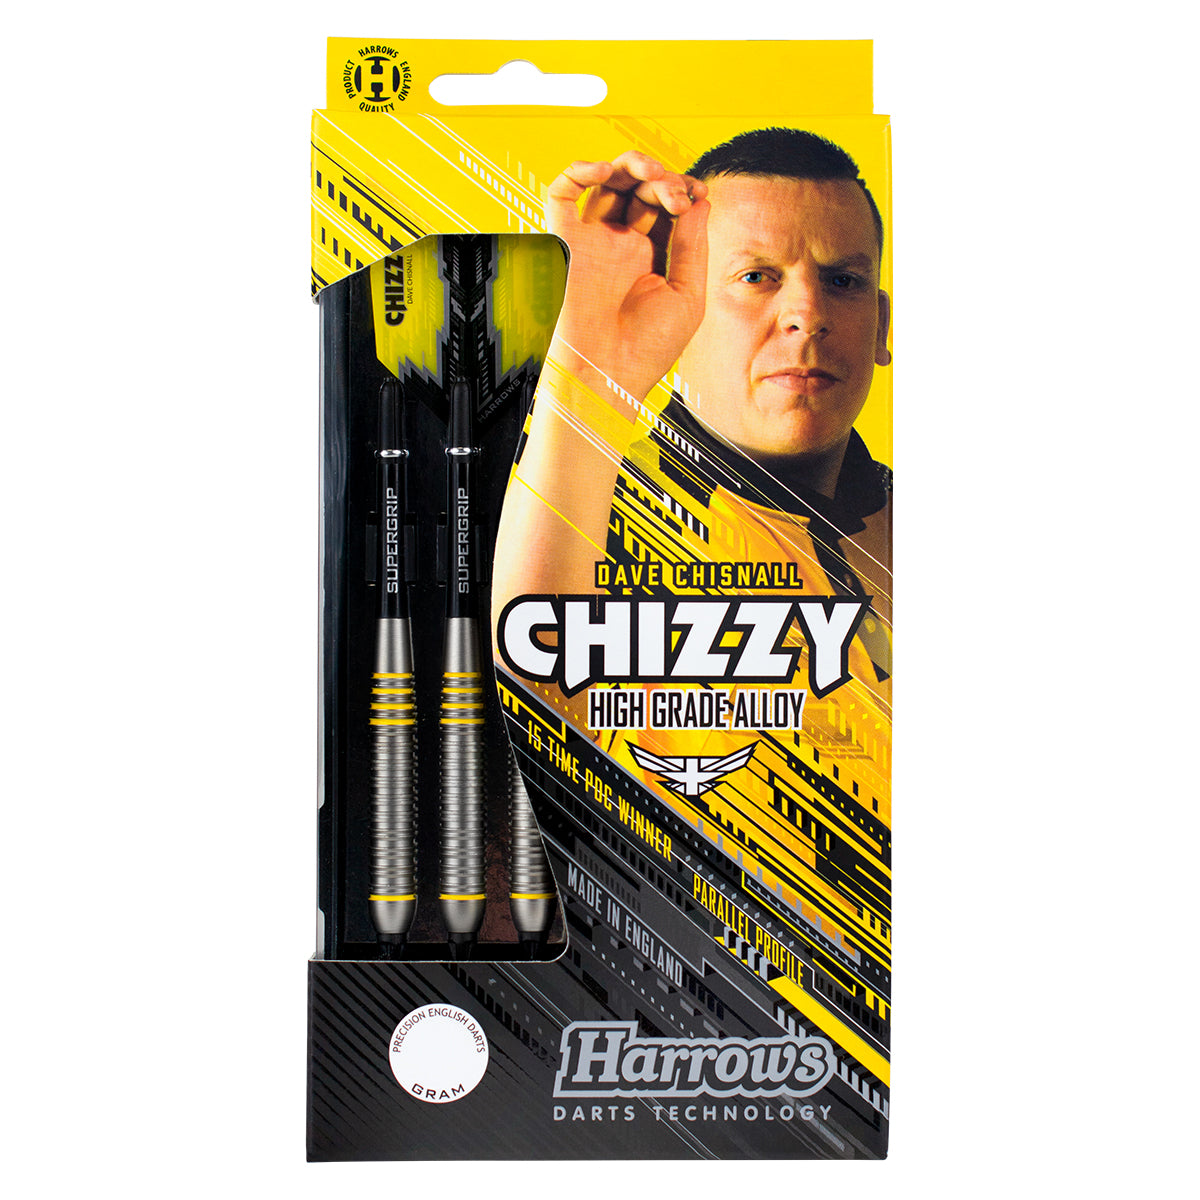 Dave Chisnall Chizzy Brass Steel Tip Darts by Harrows – Double Top 